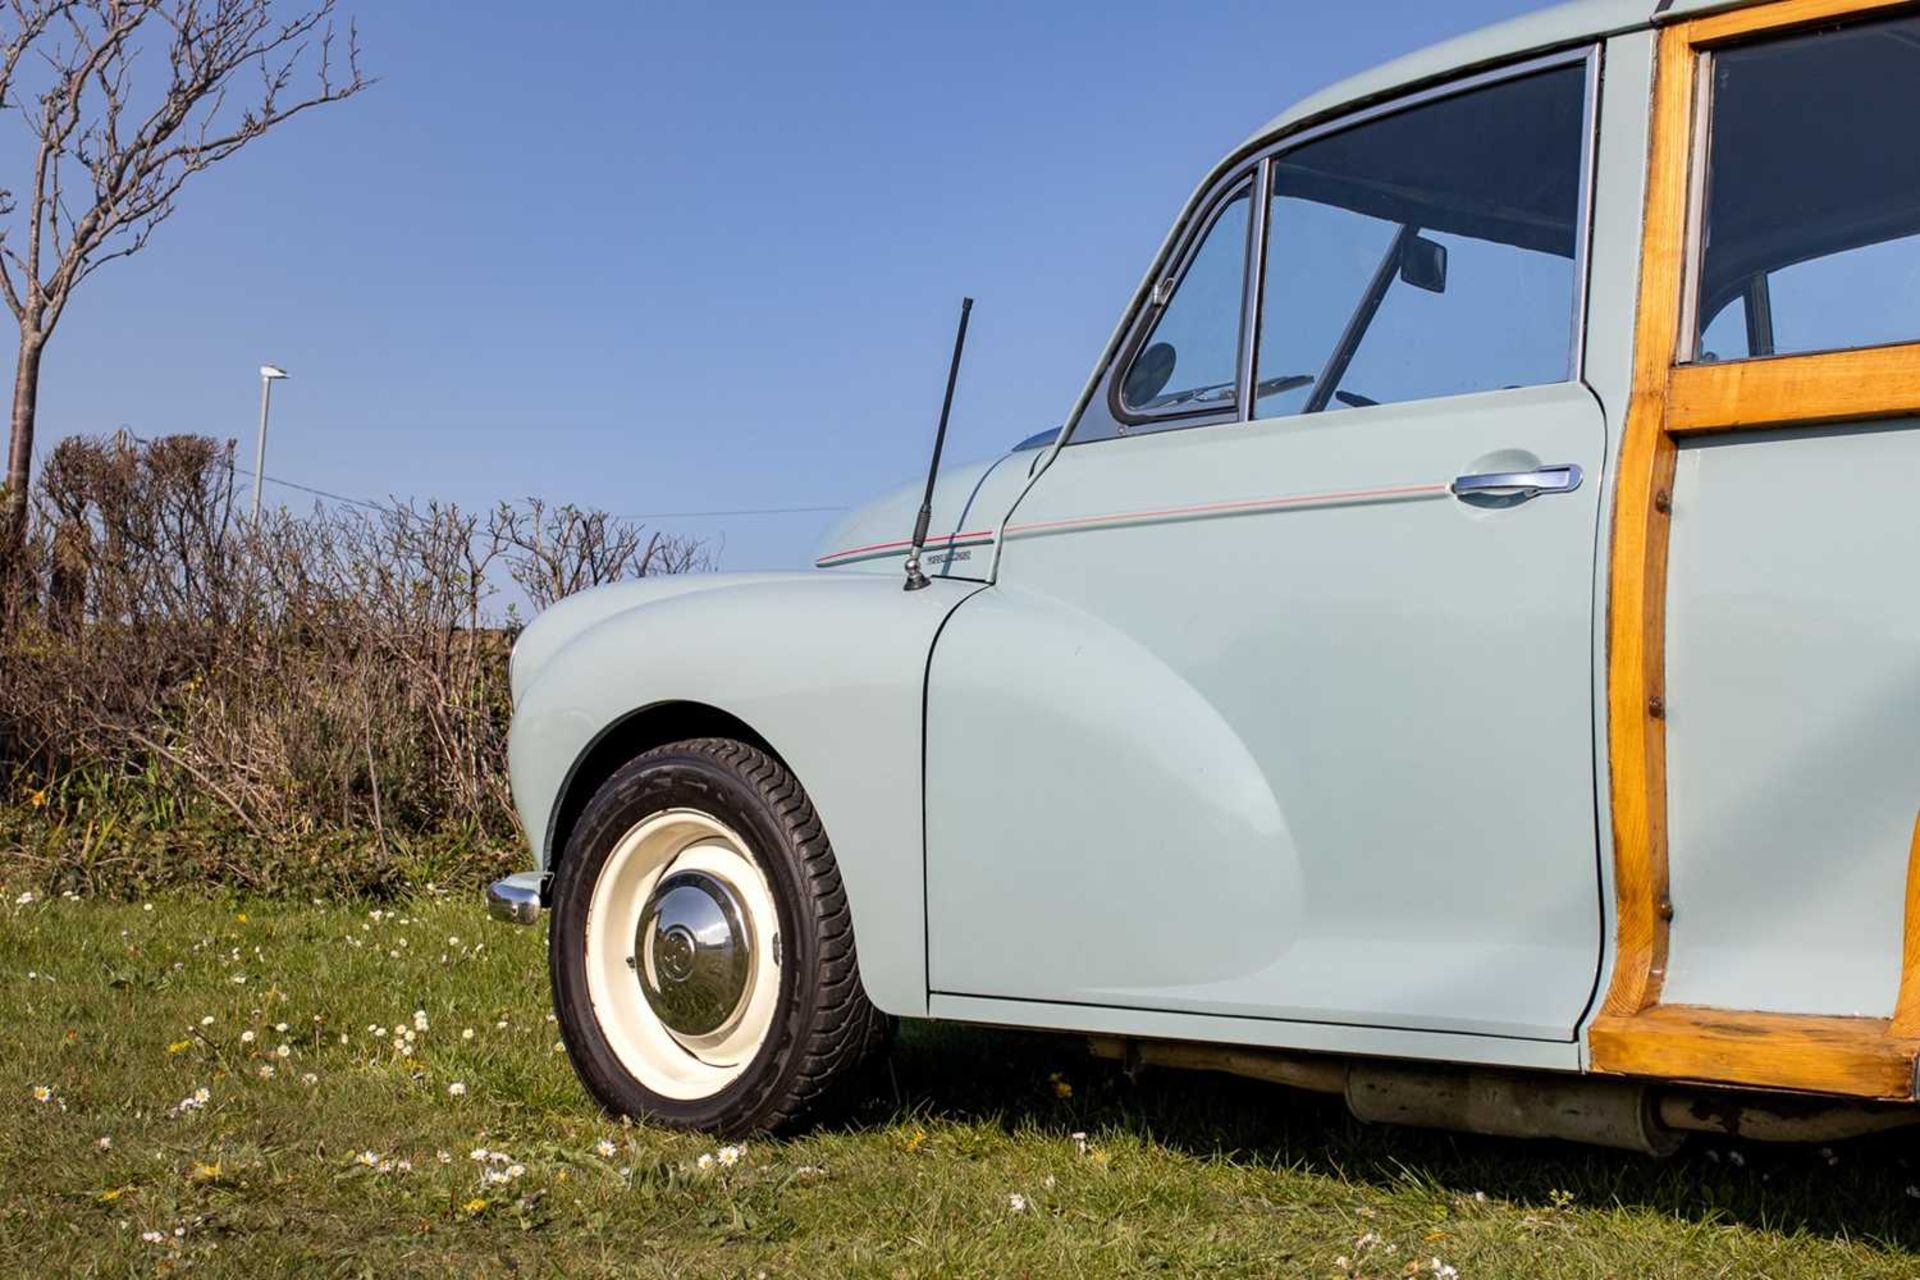 1956 Morris Minor Traveller Uprated with 1275cc engine  - Image 22 of 89